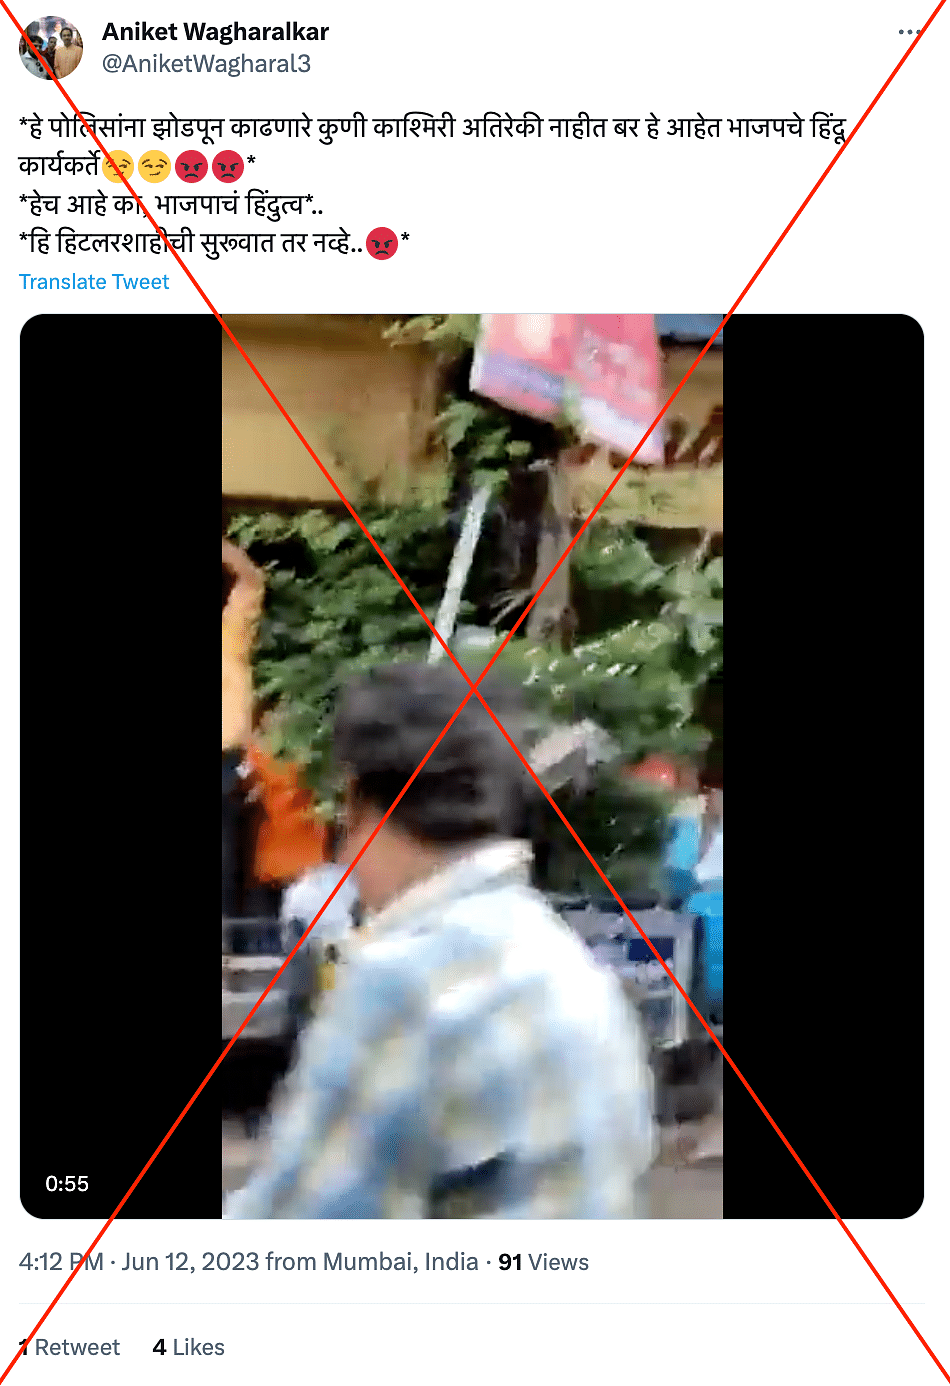 It shows Kolkata's Assistant Commissioner Debjit Chatterjee being attacked during  a BJP protest in September 2022.